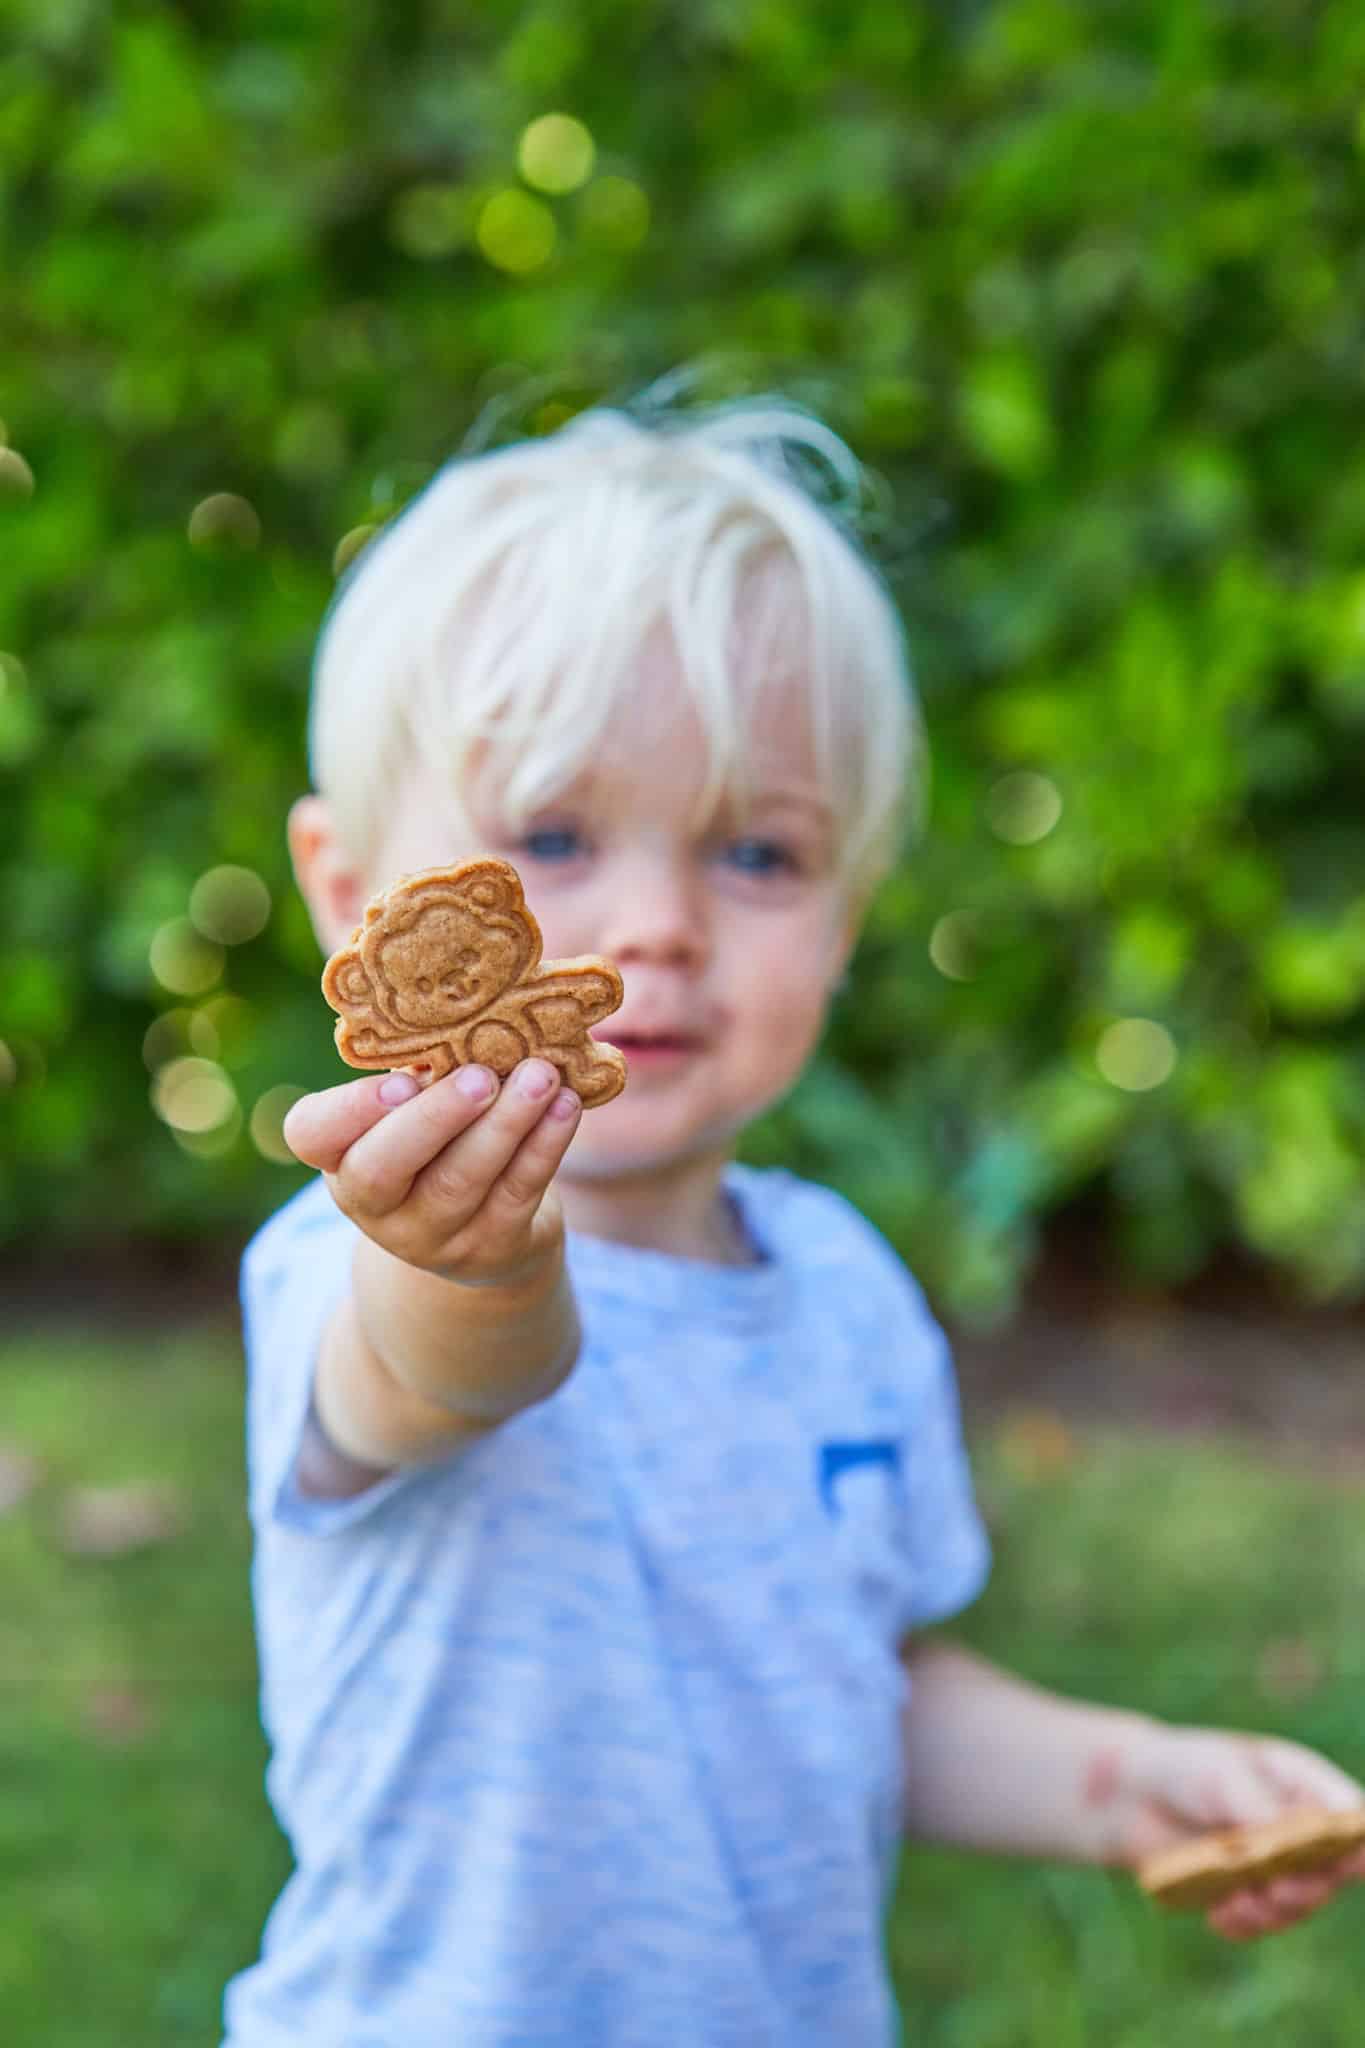 My son Georgie holding out an animal cracker for you to try.